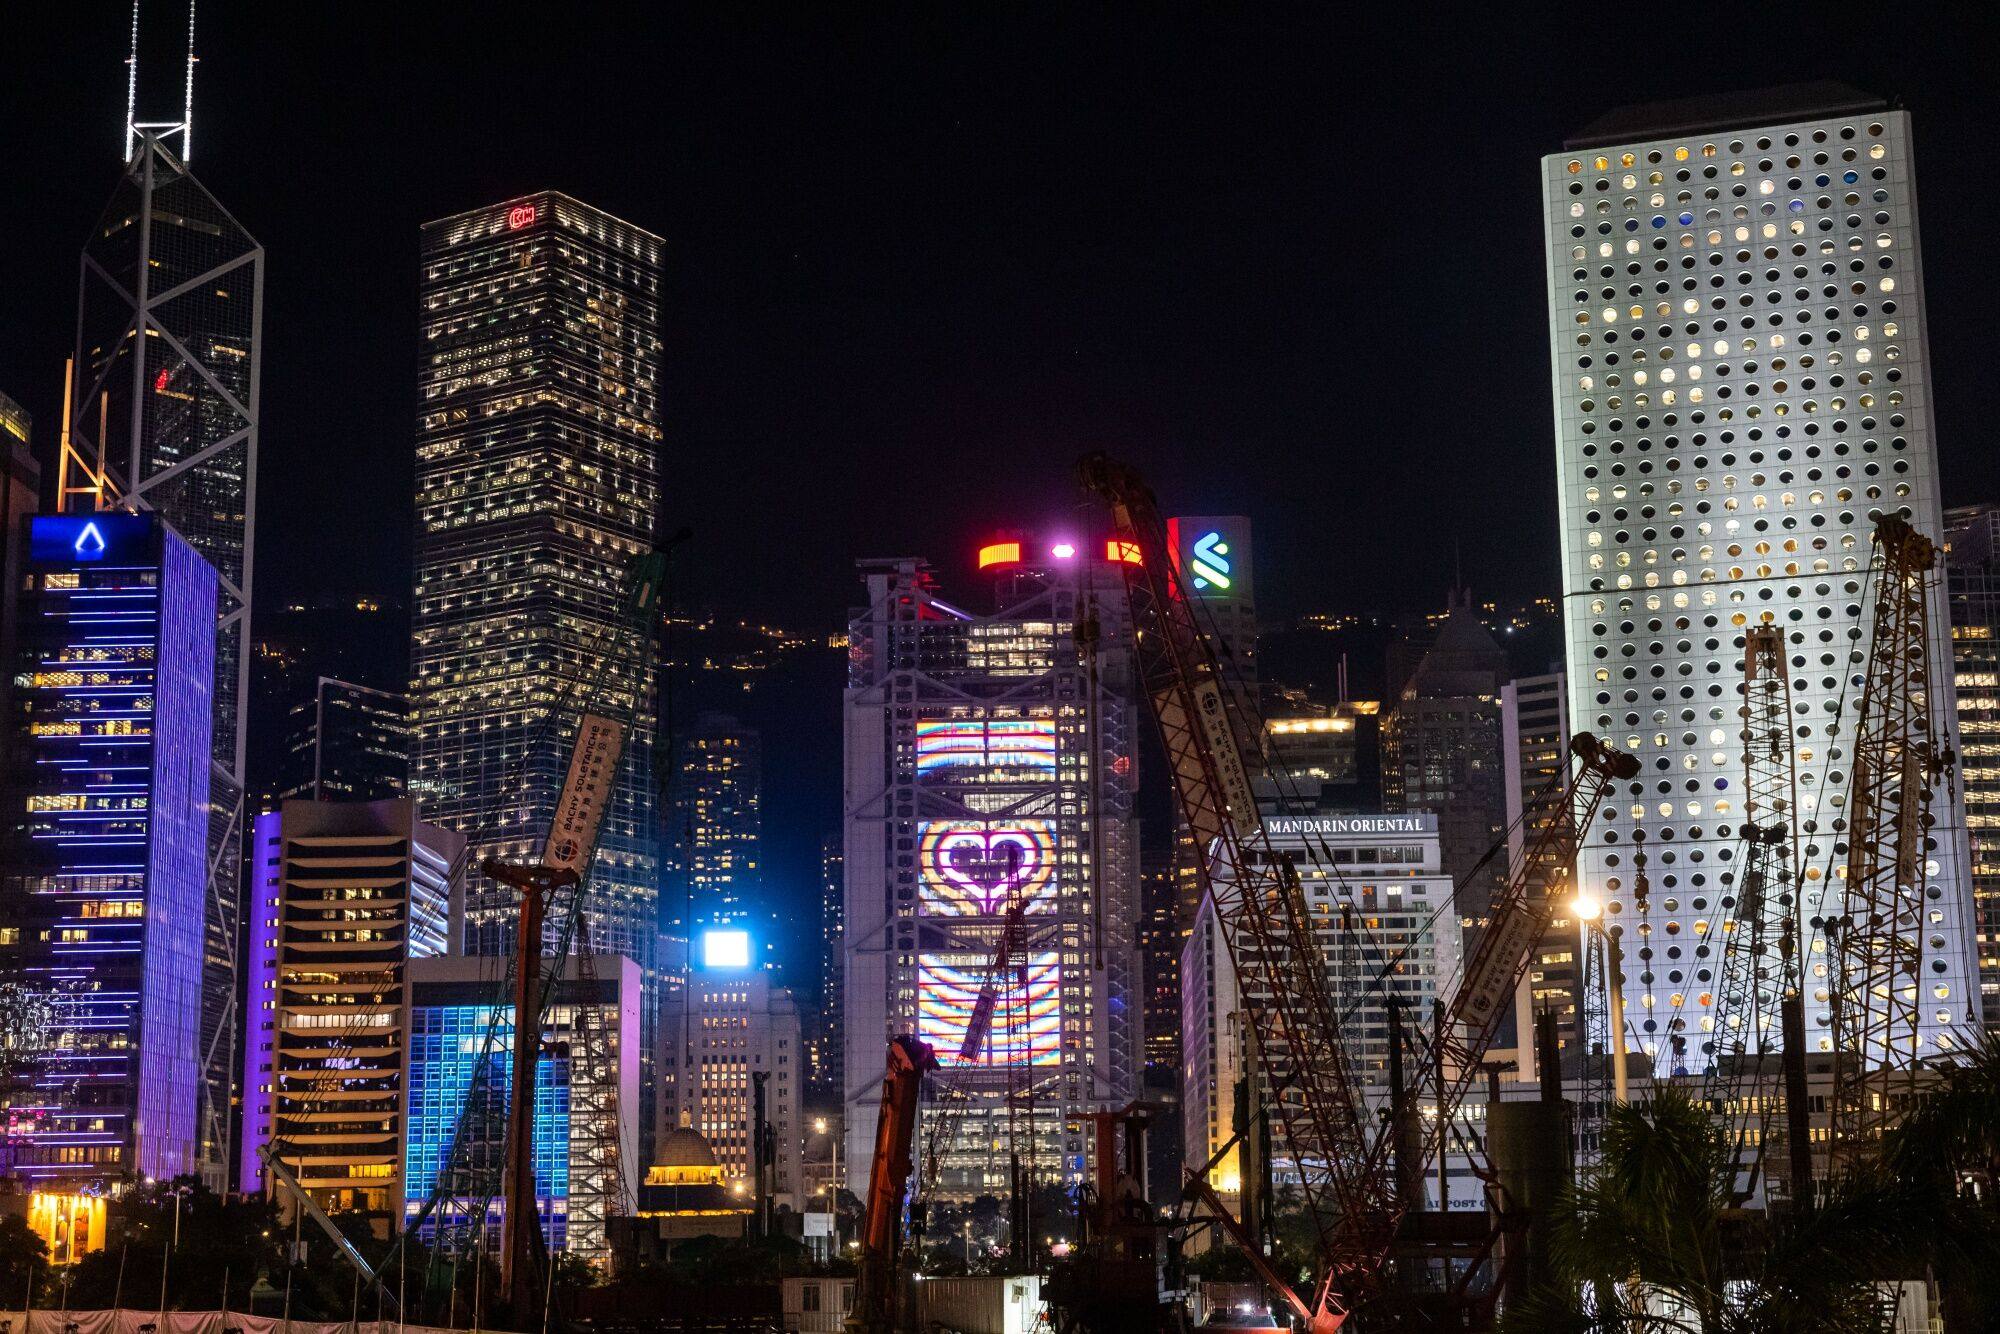 Hong Kong’s Central business district. The AFF will be followed by other key financial summits, such as Wealth for Good, in March. Photo: Bloomberg